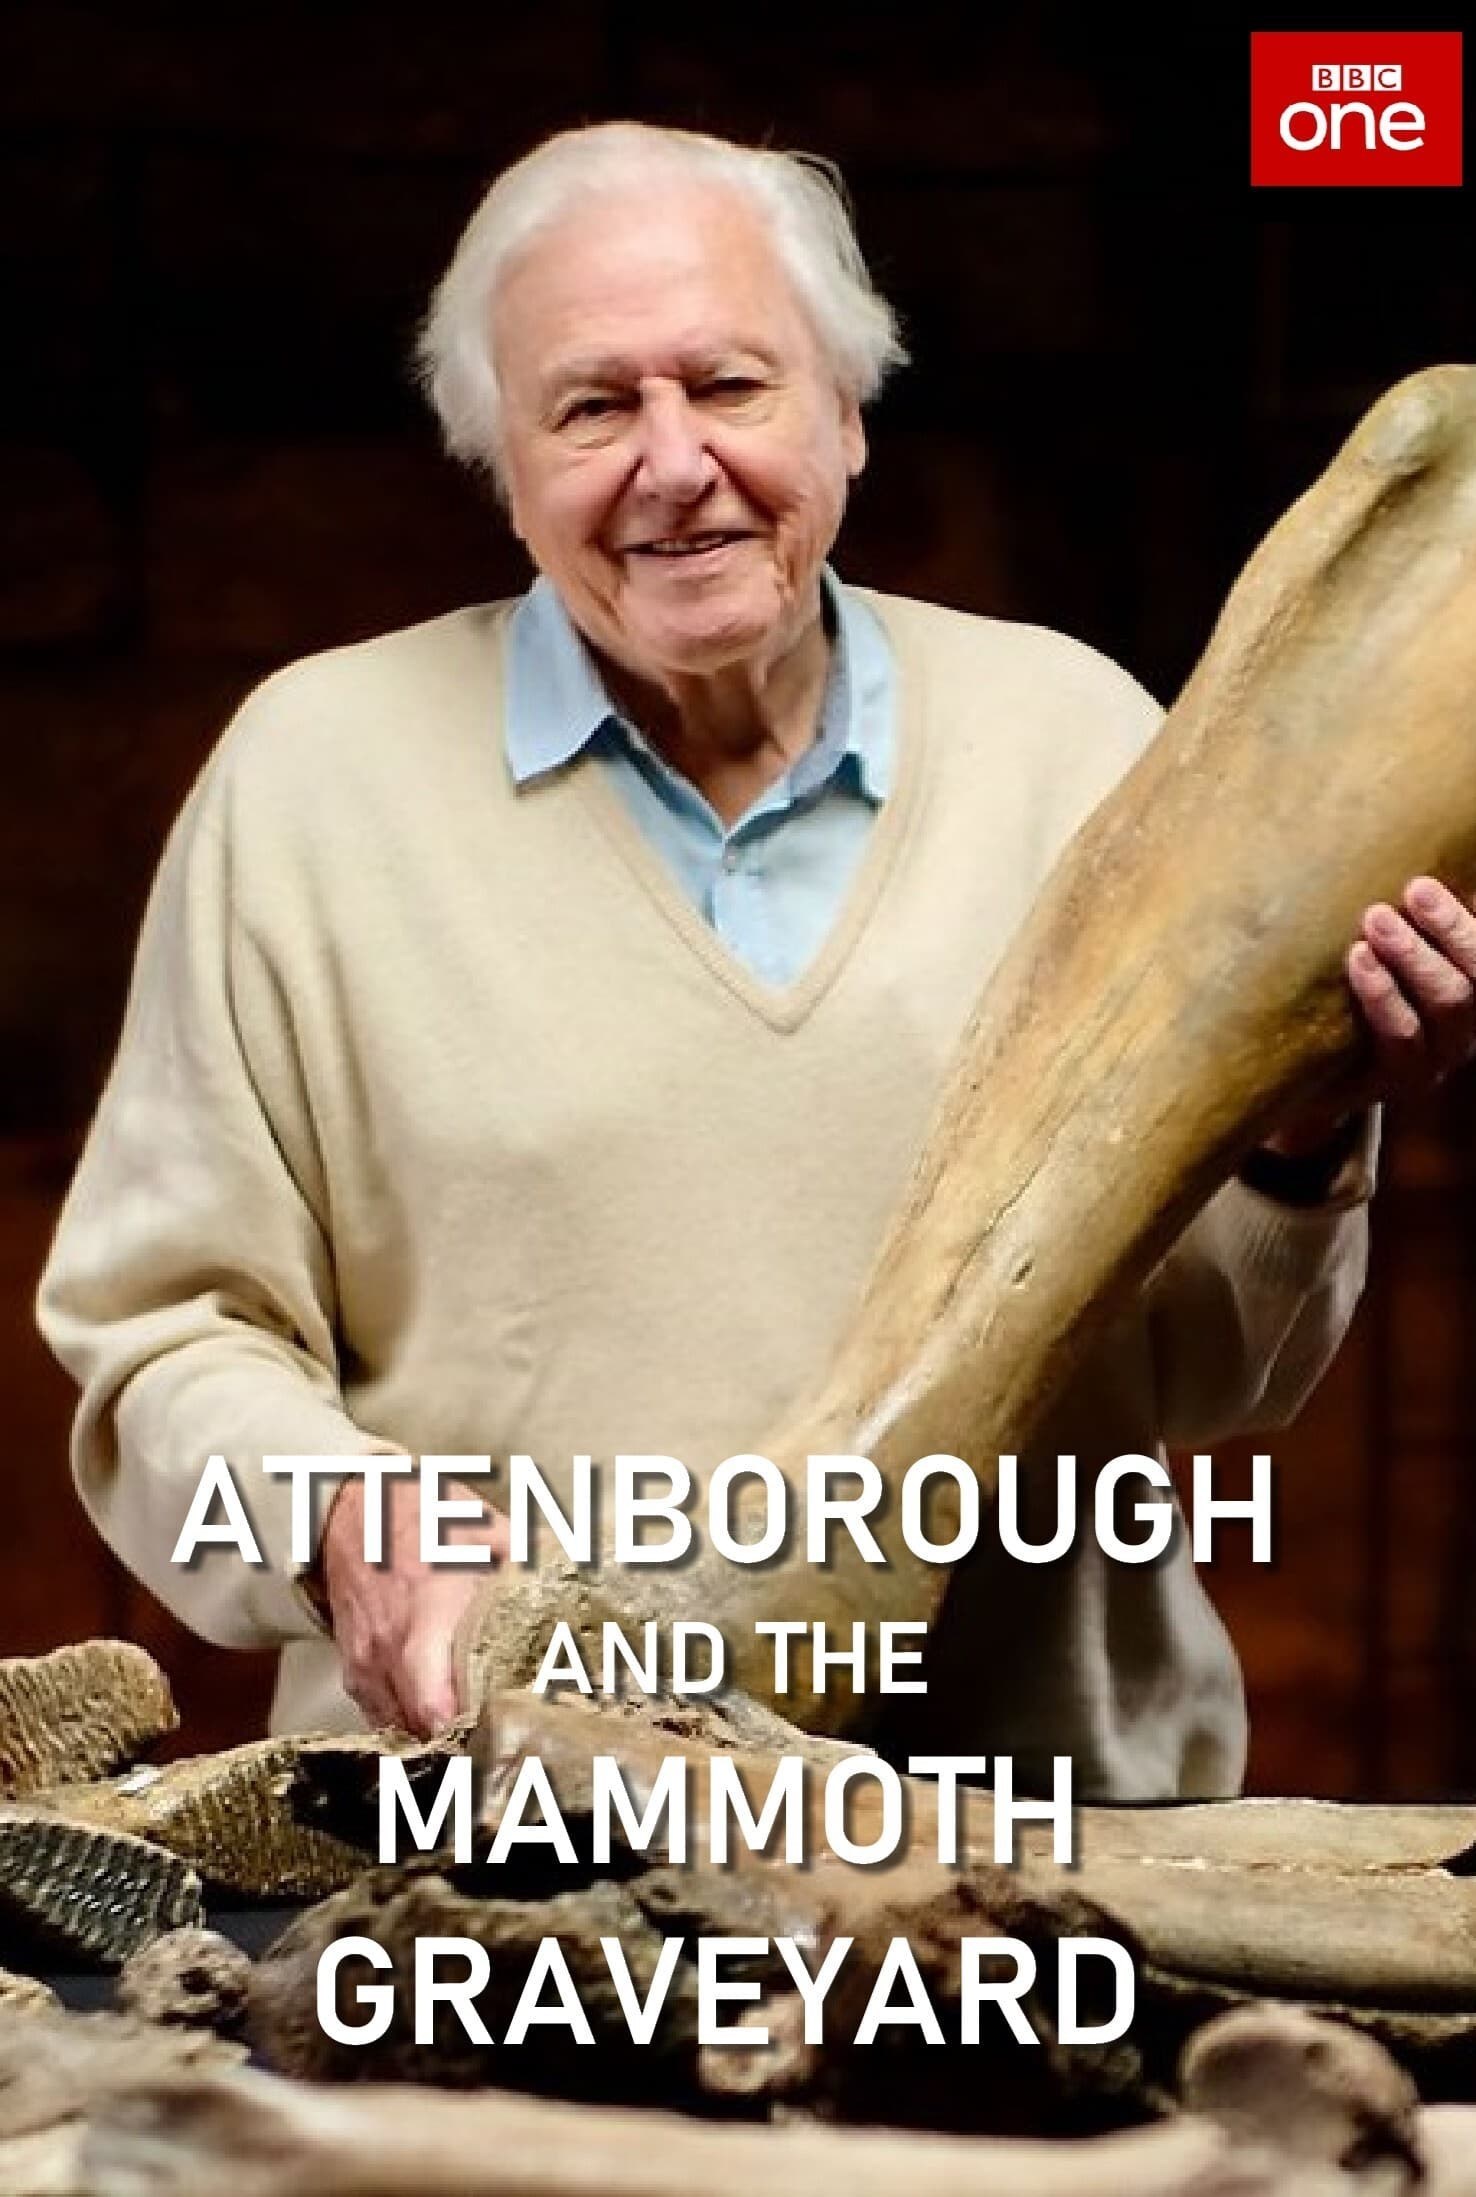 Attenborough and the Mammoth graveyard - 2021